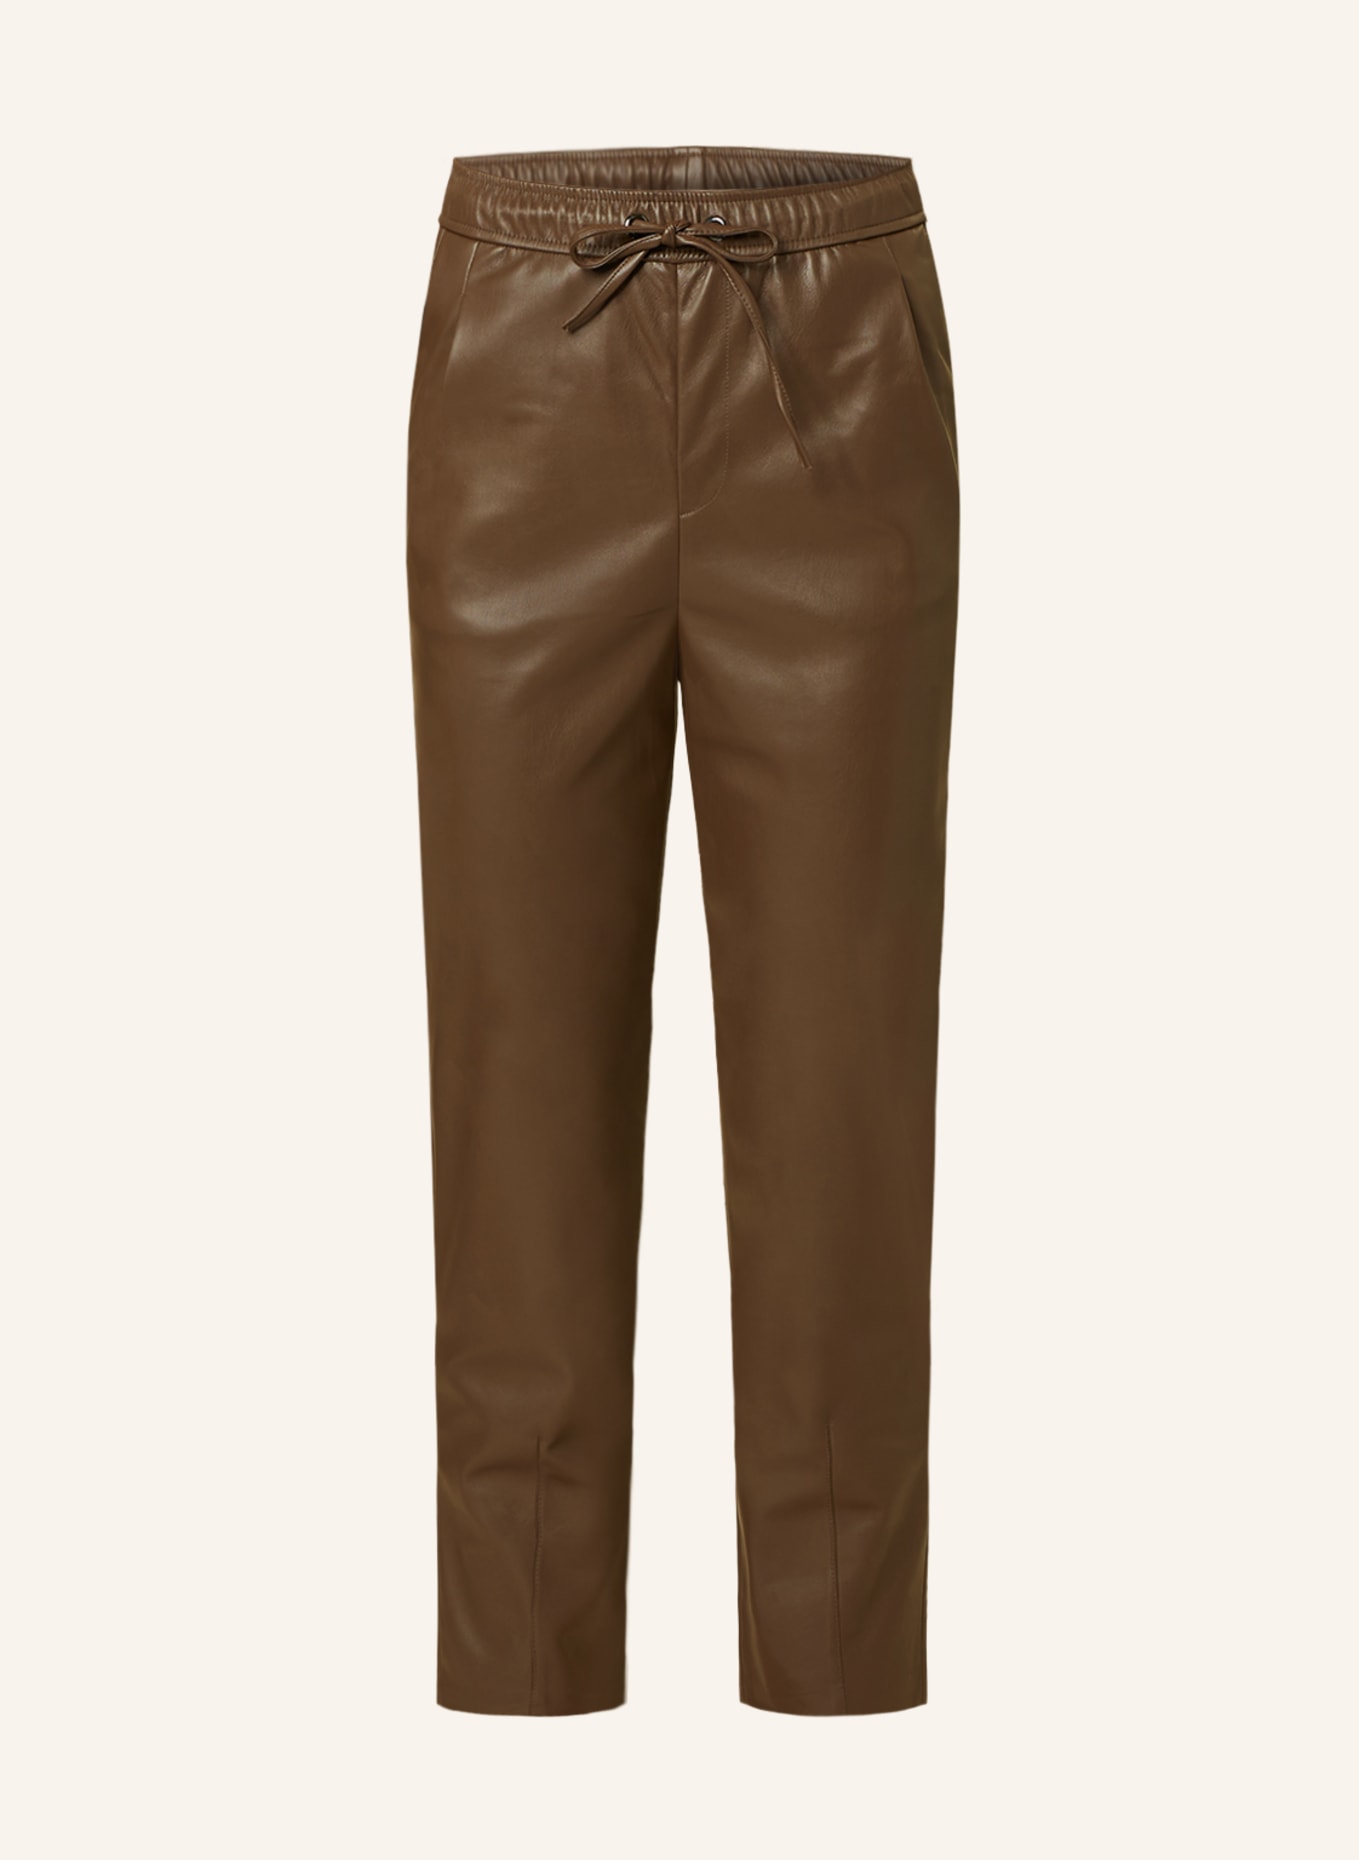 OPUS 7/8 trousers in jogger style in leather look, Color: DARK BROWN (Image 1)